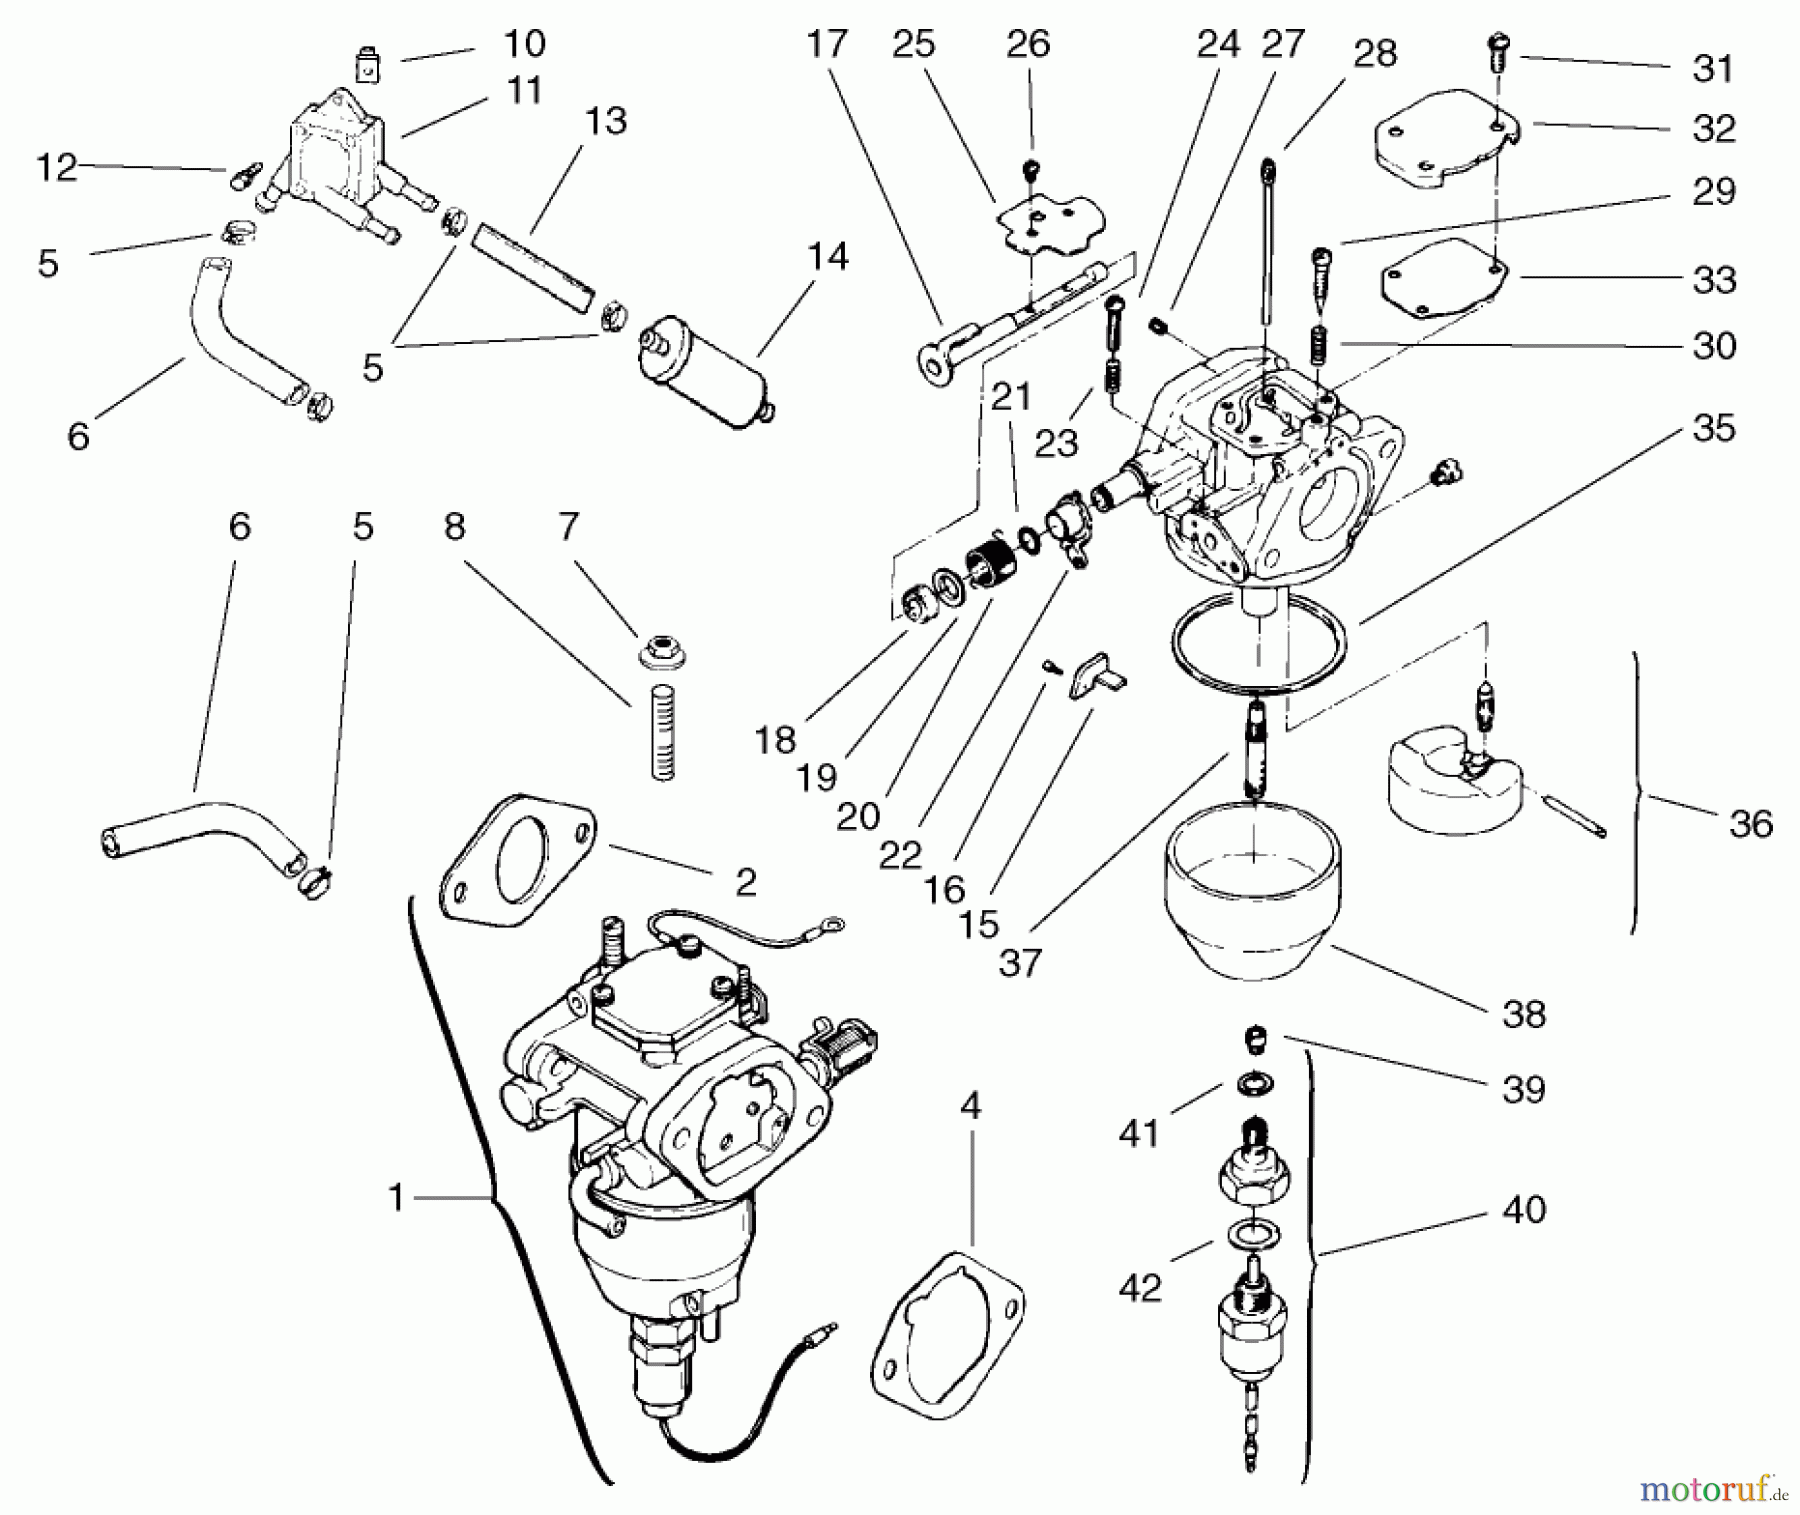  Toro Neu Mowers, Lawn & Garden Tractor Seite 1 72087 (268-H) - Toro 268-H Lawn and Garden Tractor, 2002 (220000001-220999999) FUEL SYSTEM ASSEMBLY KOHLER CV18S-PS-61528 AND CV18S-PS-61529